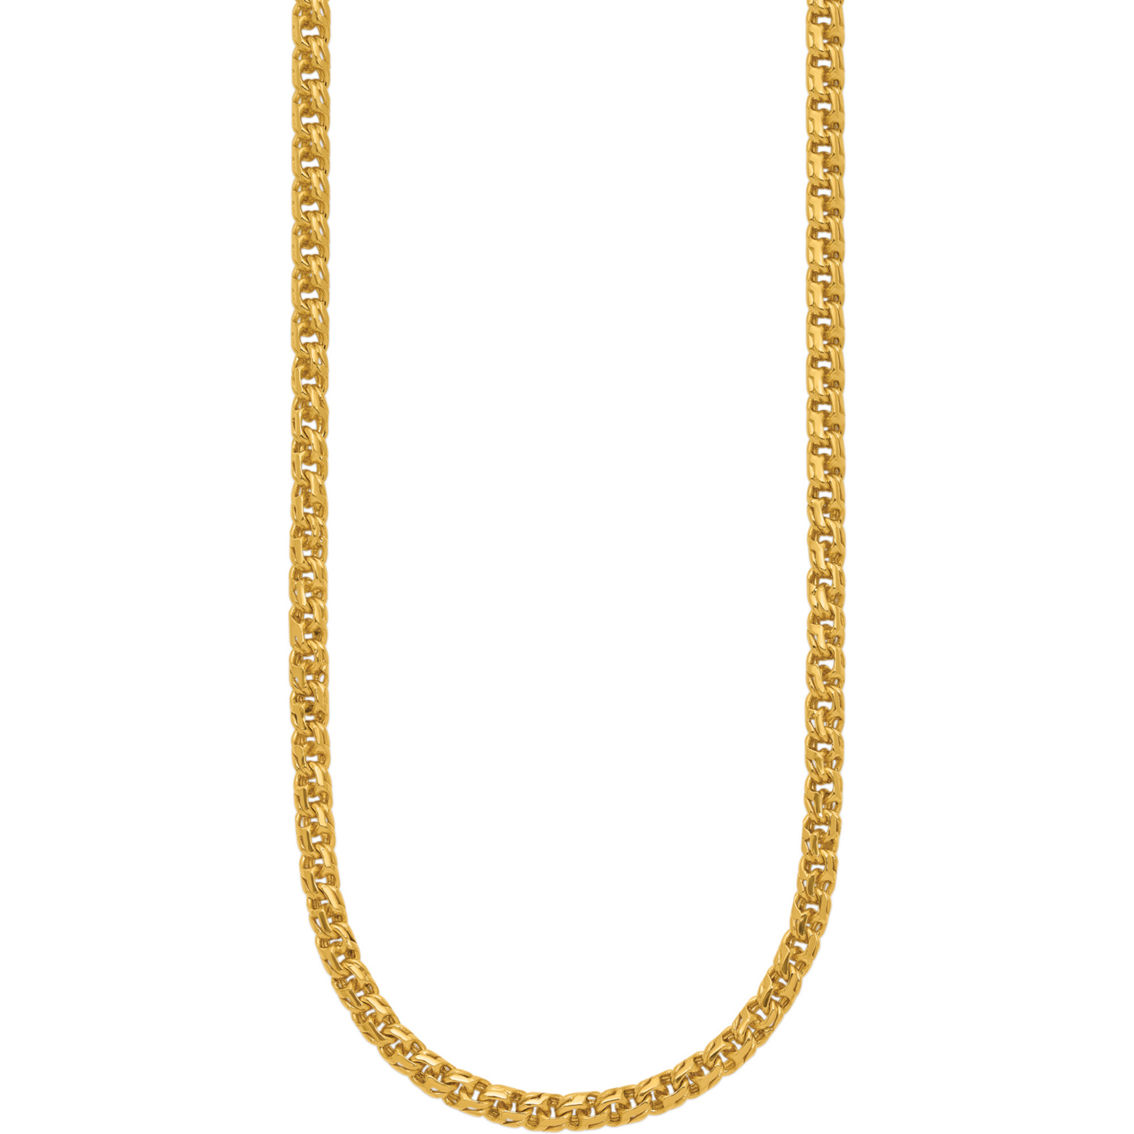 24K Pure Gold 24K Yellow Gold Double Interlocking 20 in. Curb Chain - Image 2 of 5